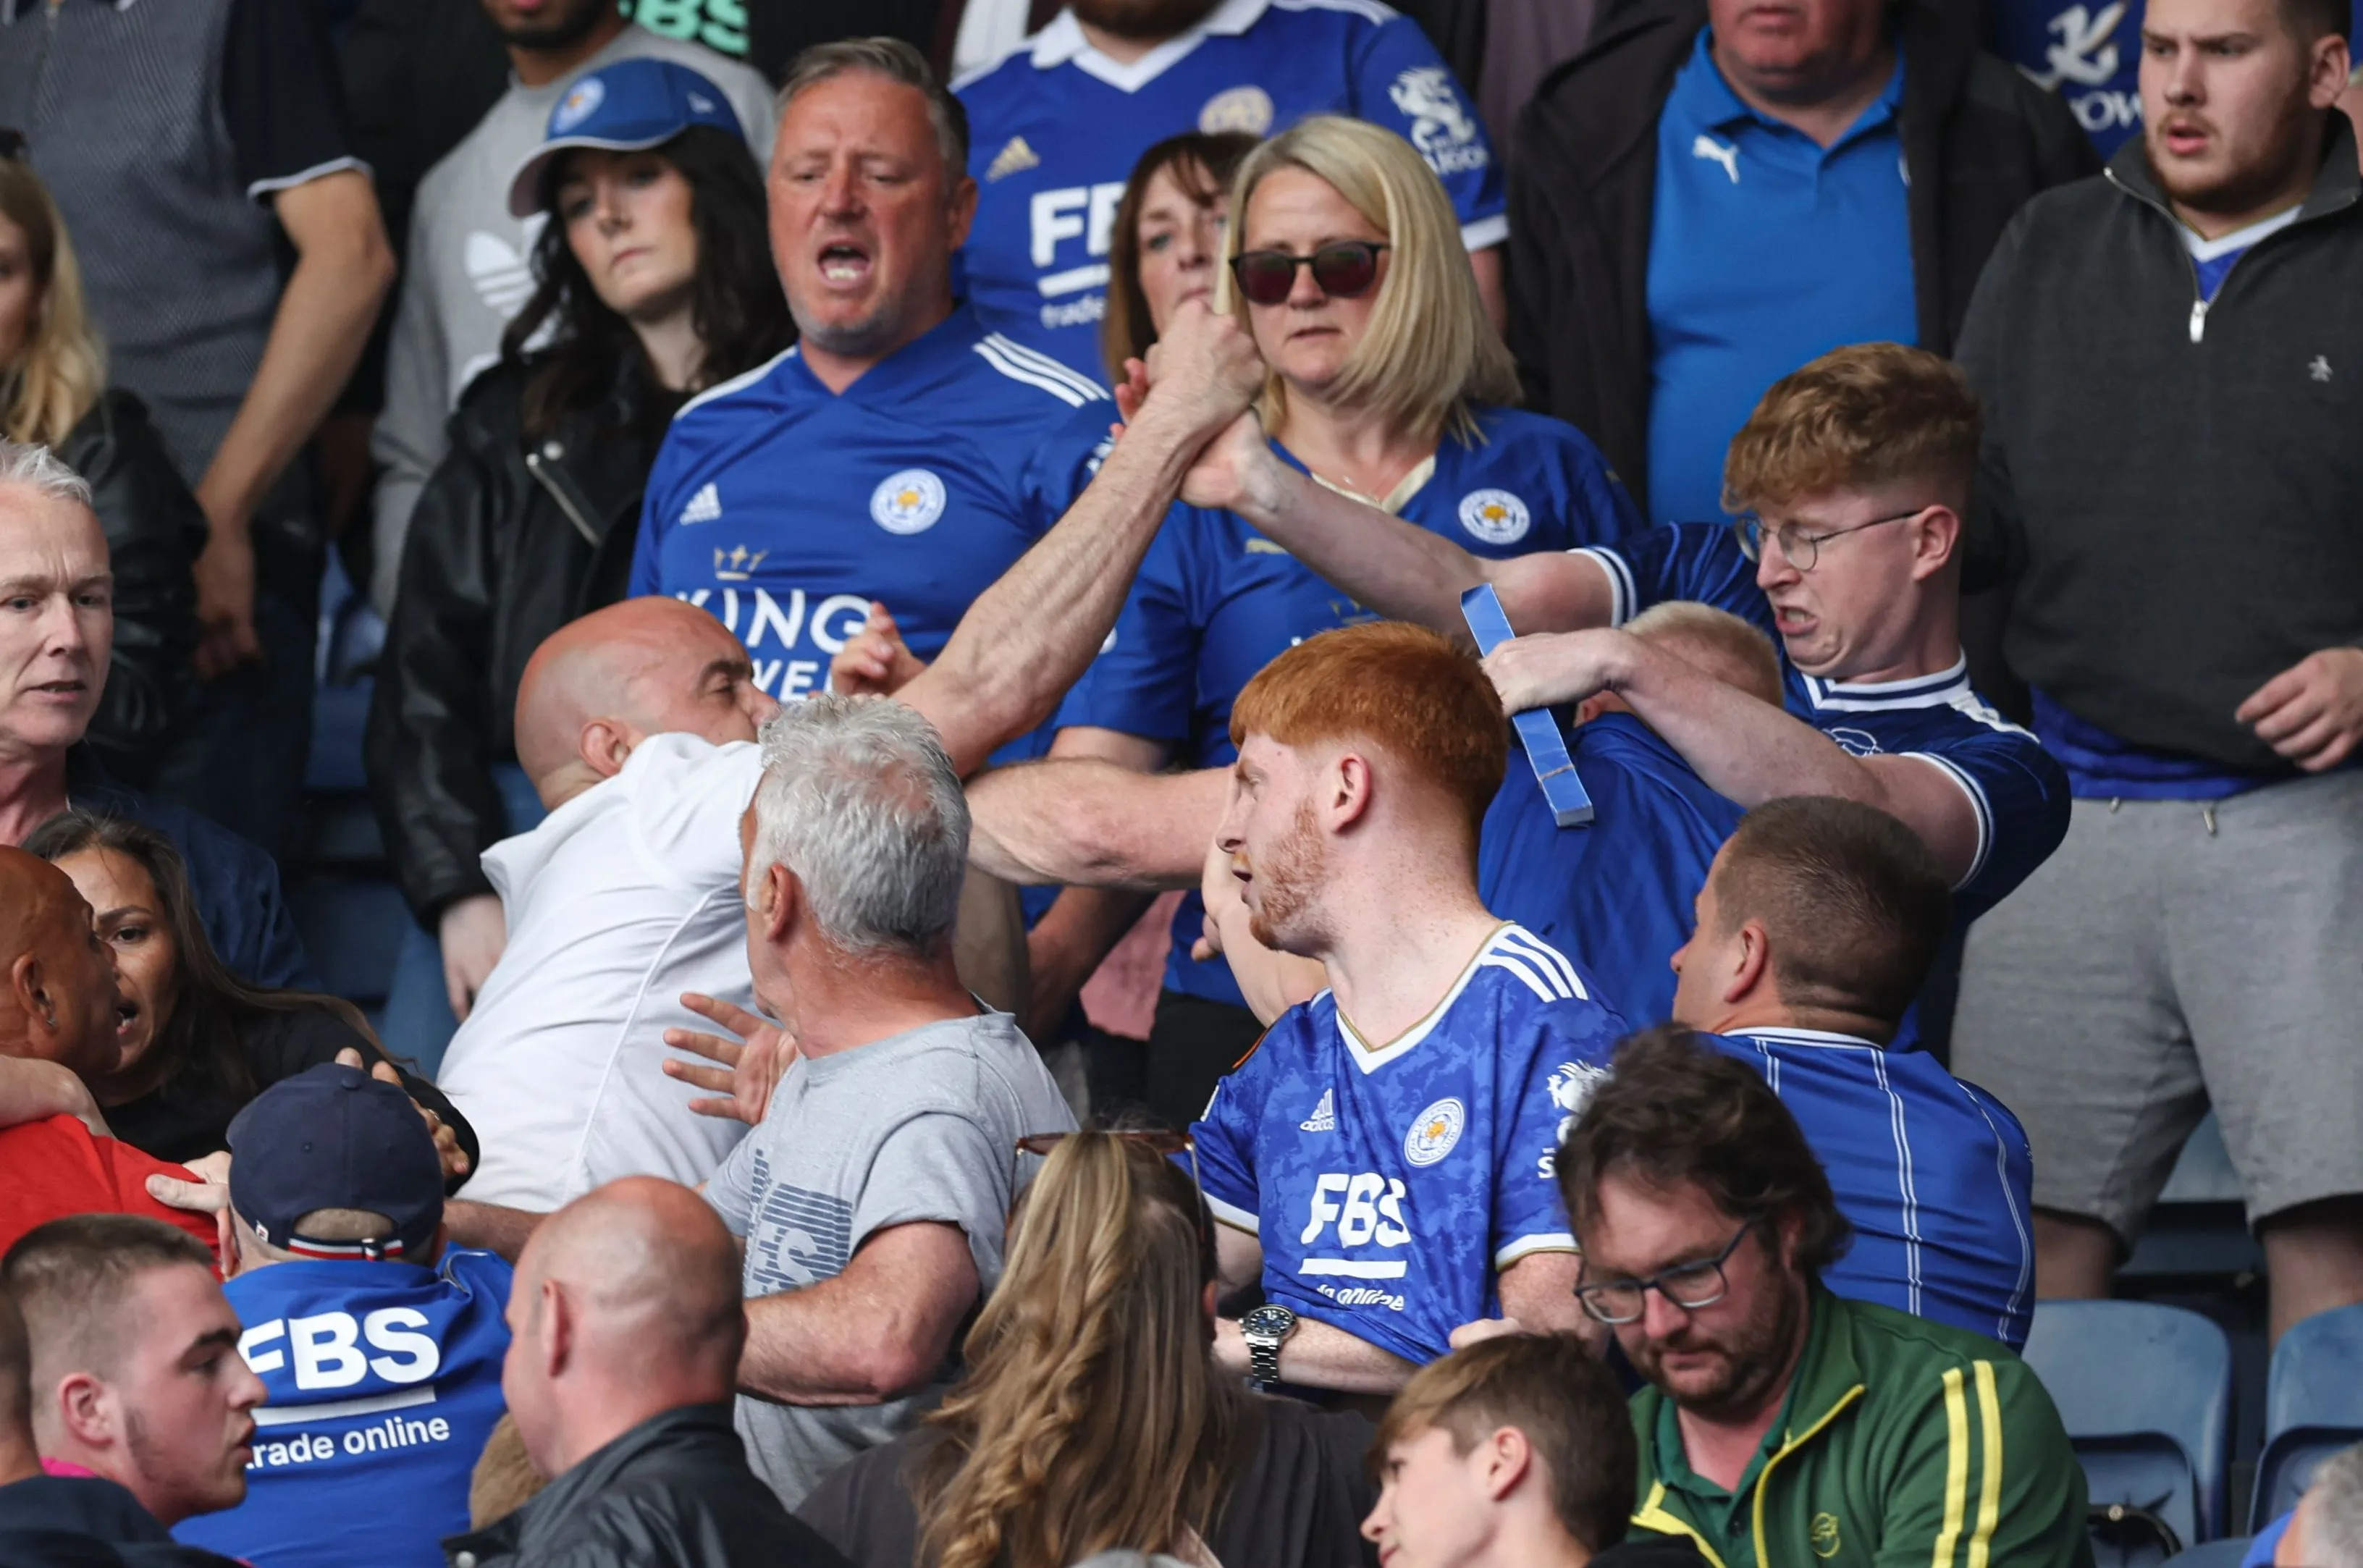 , Raging Leicester fans fight in stands as they turn on each other after they are relegated from Premier League